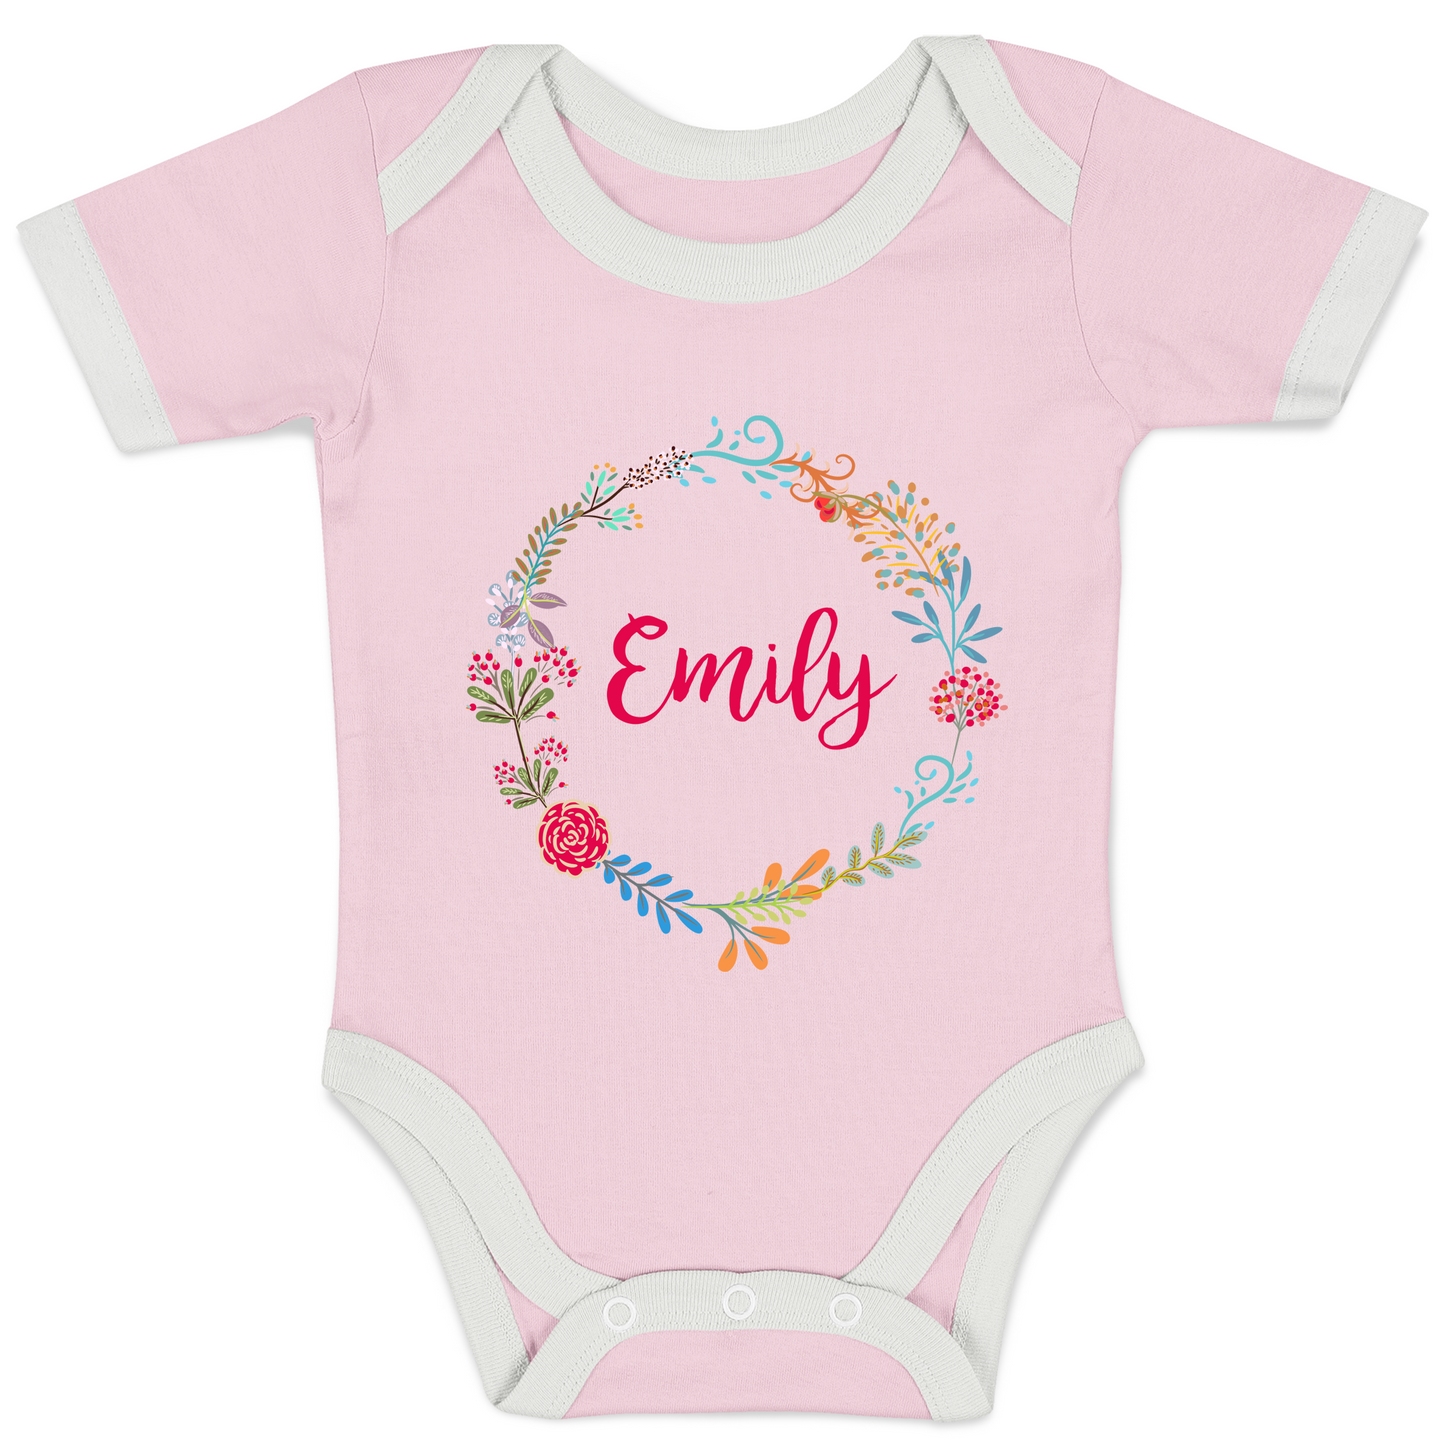 Personalized Organic Long Sleeve Baby Bodysuit - Floral Round (Pink)